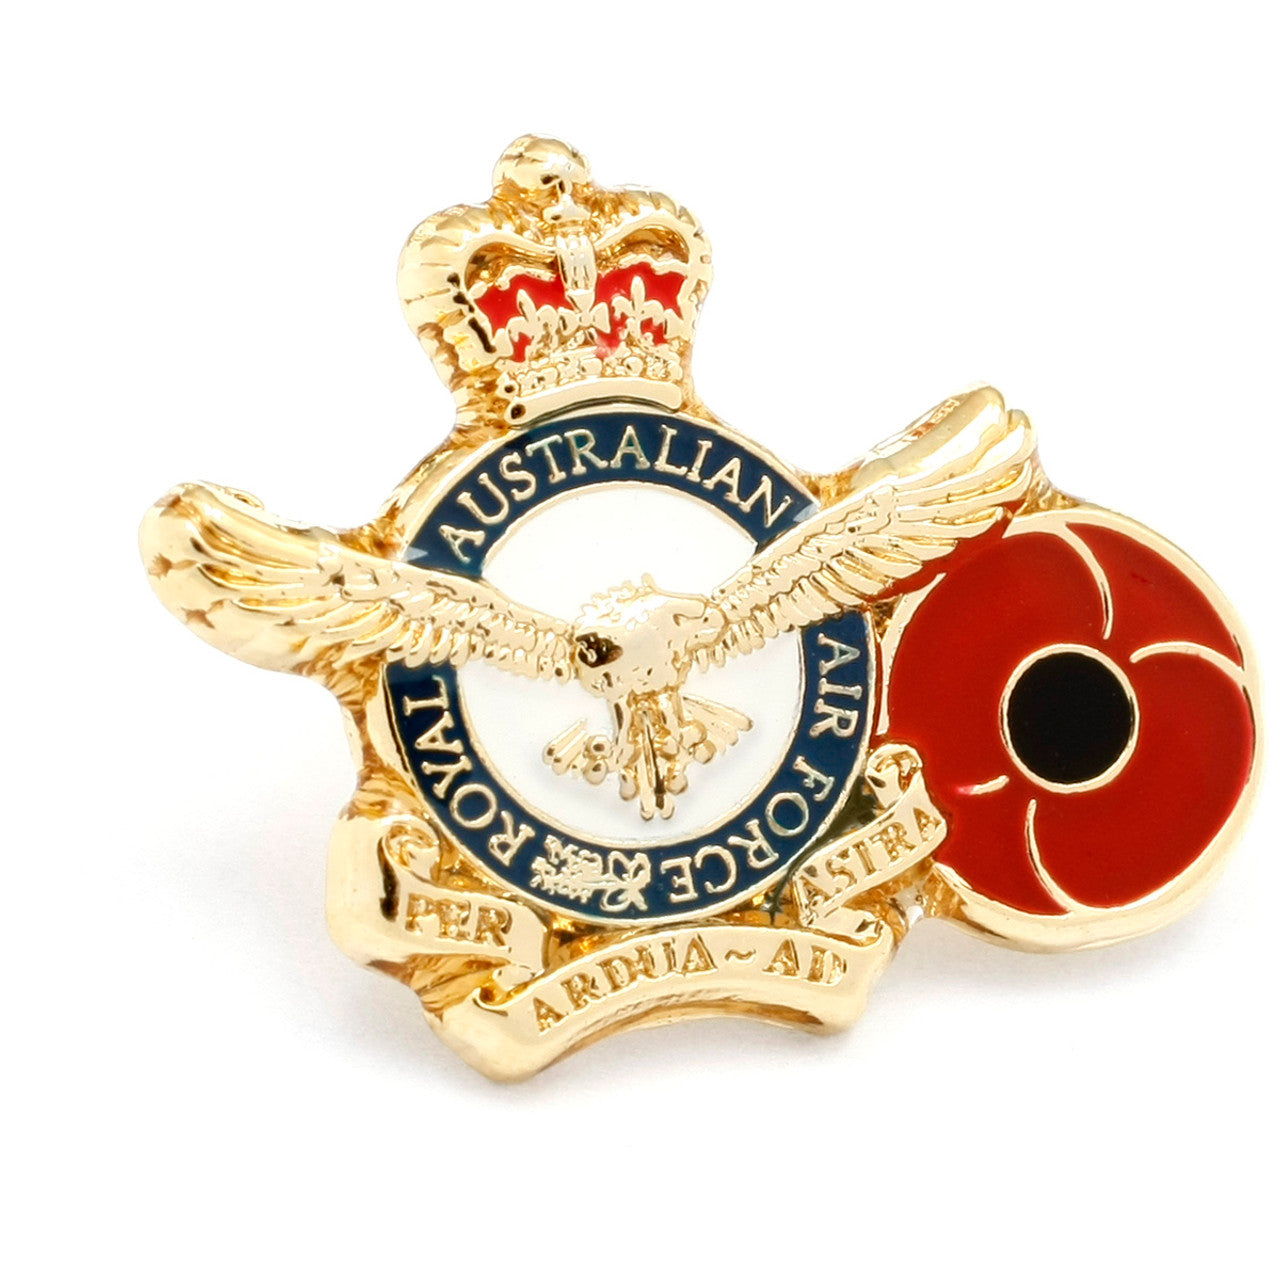 This badge pays homage to the long tradition of service of the Royal Australian Air Force, reminding us of their dedication and bravery. www.defenceqstore.com.au